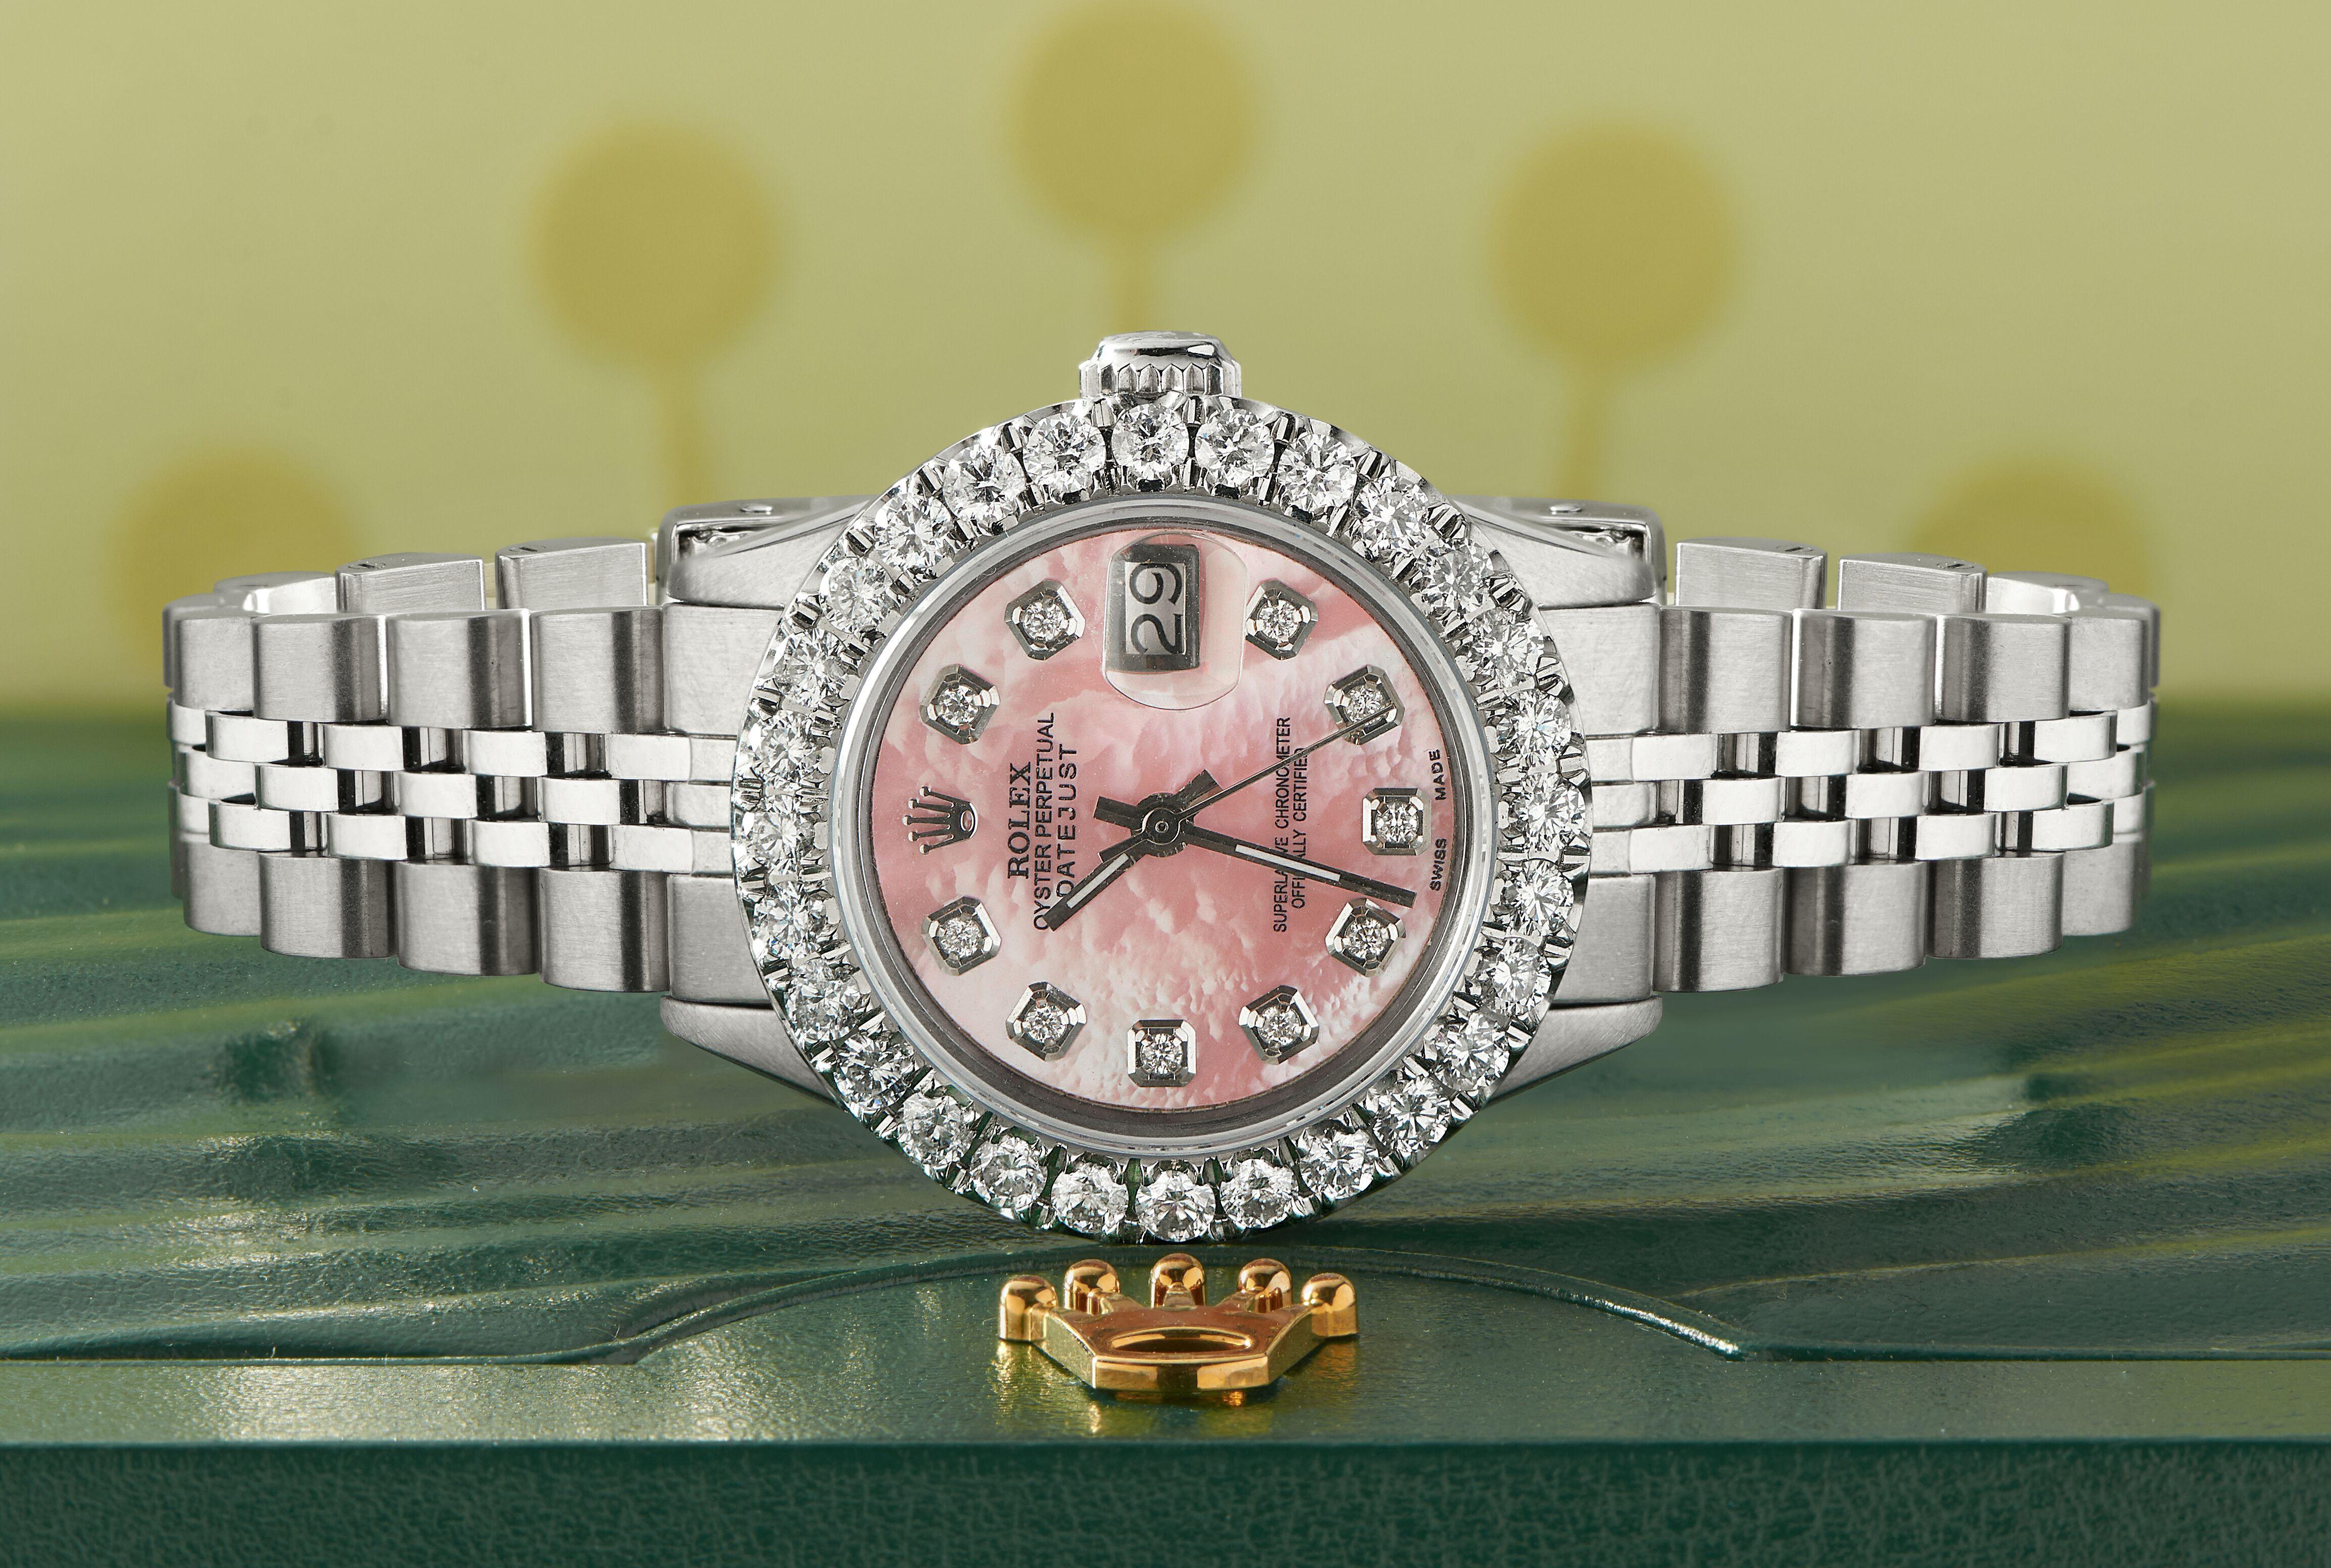 Rolex Datejust Steel Ladies Watch. Self-winding Rolex automatic movement. Stainless steel case 26mm in diameter. Custom 2.0ct diamond bezel. Screw-down crown. Scratch-resistant sapphire crystal. Custom vibrant pink diamond dial. Factory stainless